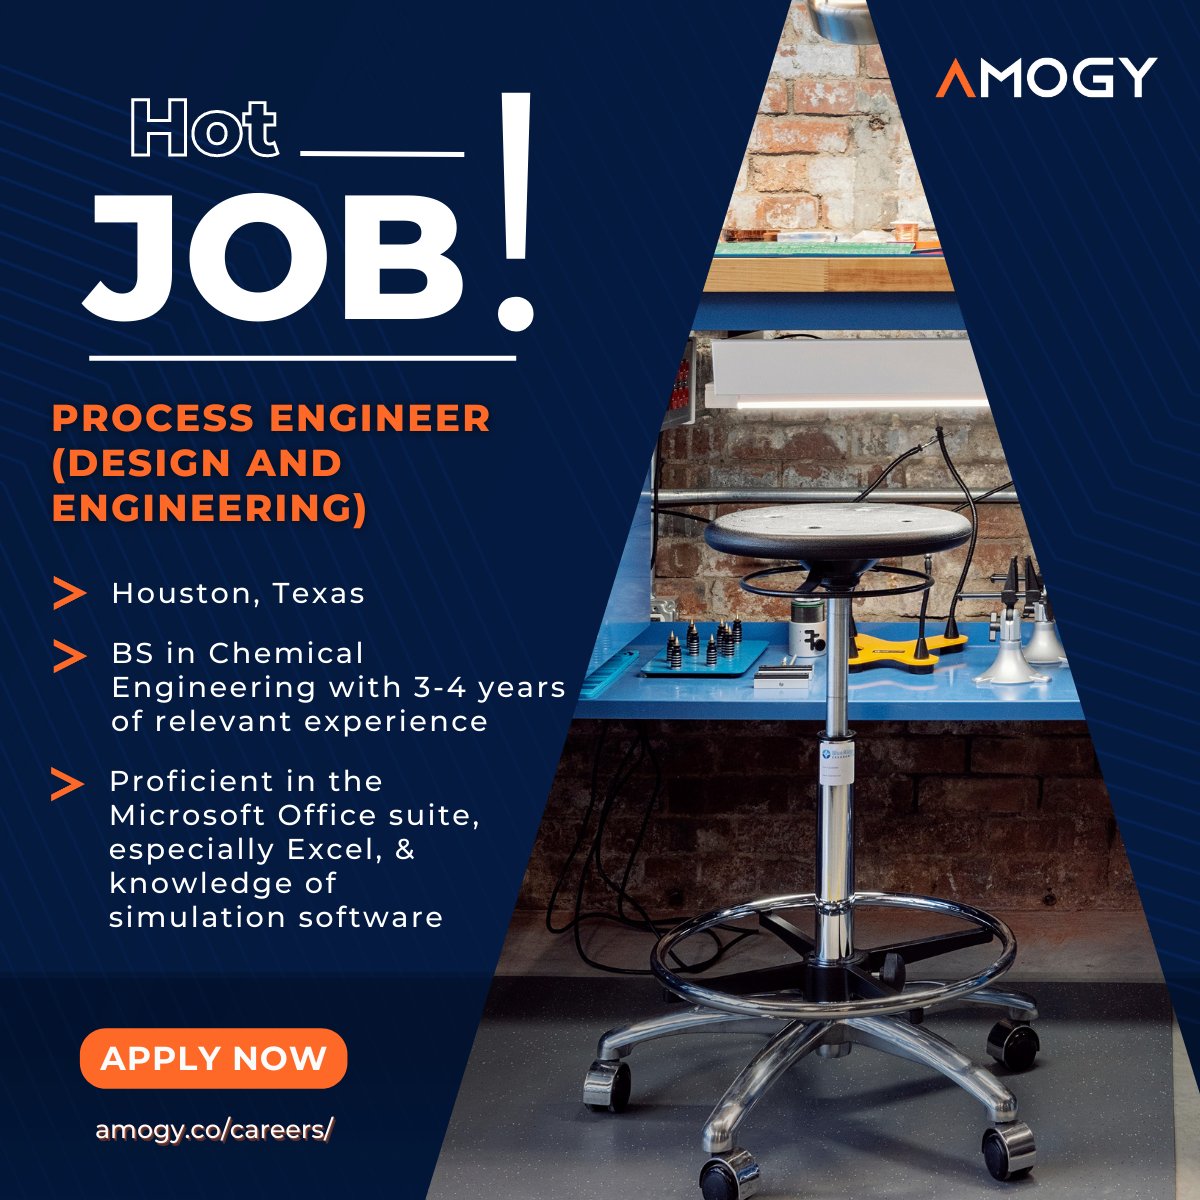 Amogy's #HotJob 🔥 of the week! We are looking for a Process Engineer to join our Product team.

👉 For more info & to apply: hubs.ly/Q01Qzkcx0

#Amogy #AmogyHotJob #ProcessEngineering #EngineeringCareers #EngineerJobs #ClimateJobs #TechJobs